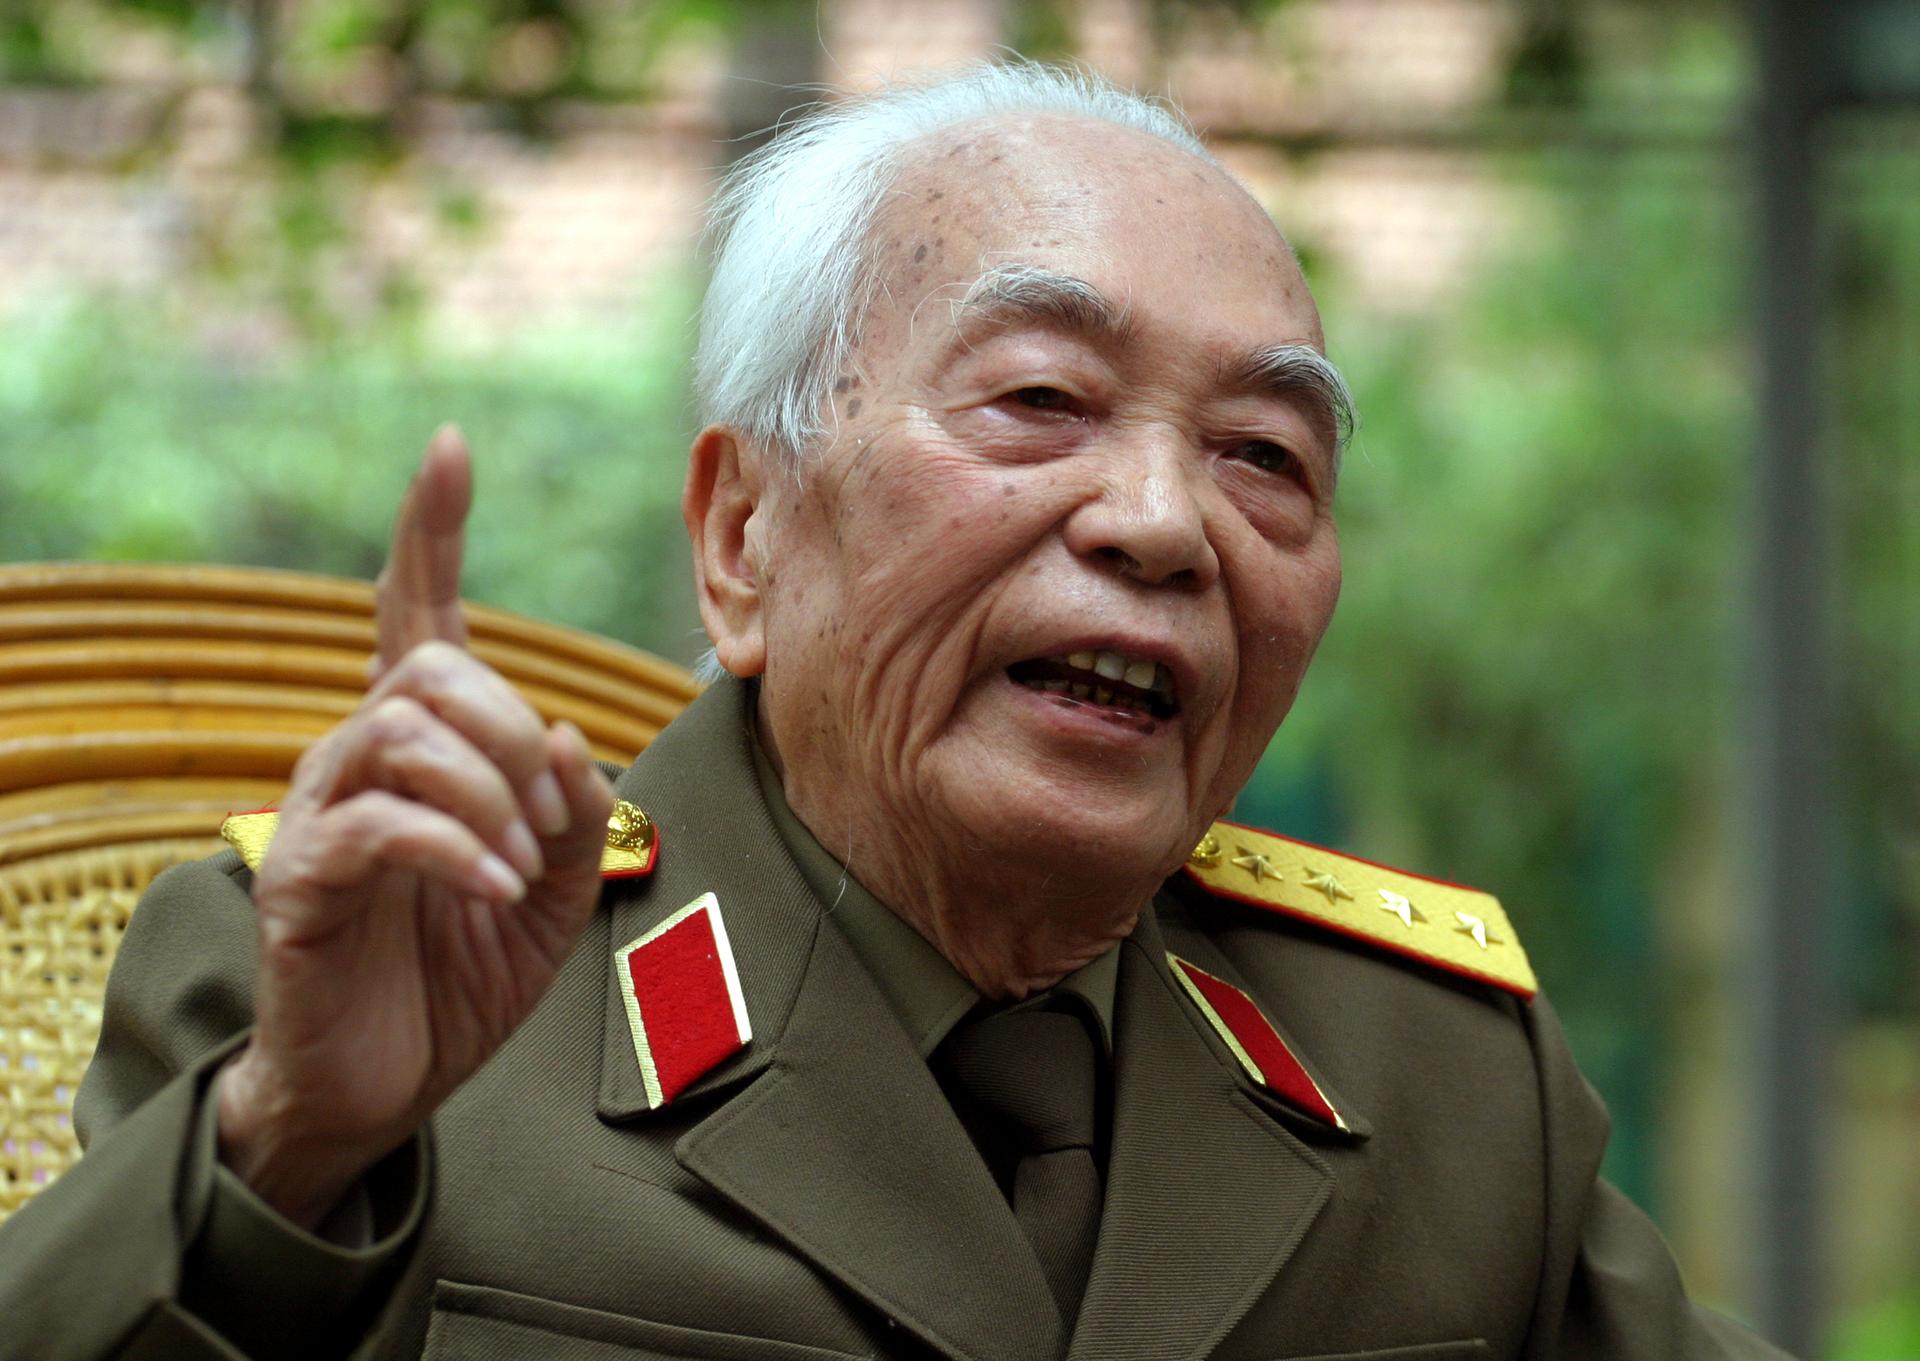 General Vo Nguyen Giap speaking during an interview in Hanoi, in 2004, on the 50th anniversary of his stunning and decisive defeat of the French at Dien Bien Phu.